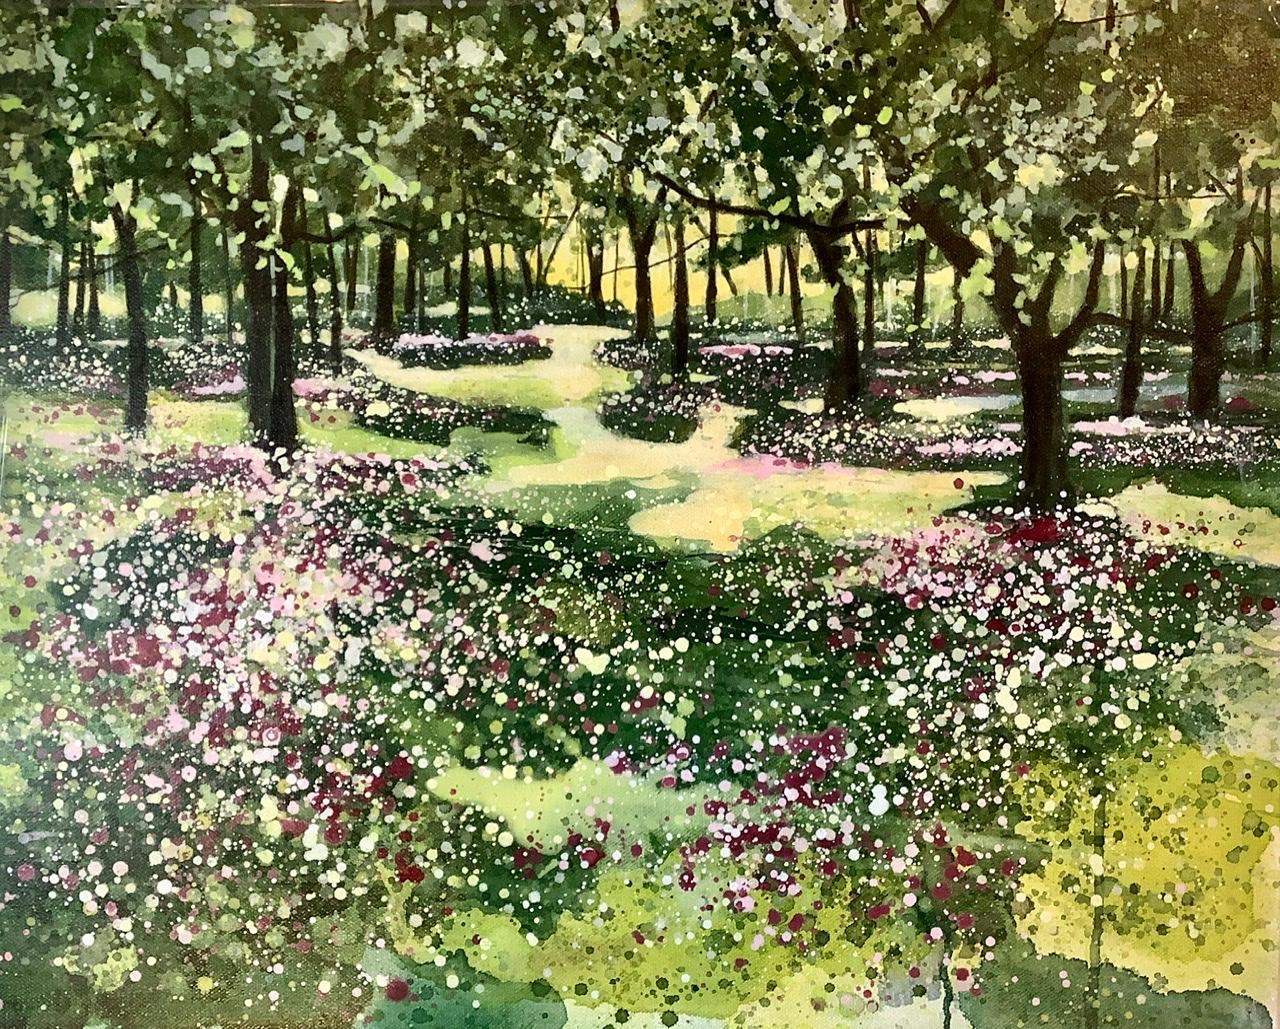 Woodlands Treasures [2022]
Please note that insitu images are purely an indication of how a piece may look

Woodlands Treasures is an original landscape painting by Adele Riley. This woodland scene exudes light, sun and warmth with its glorious